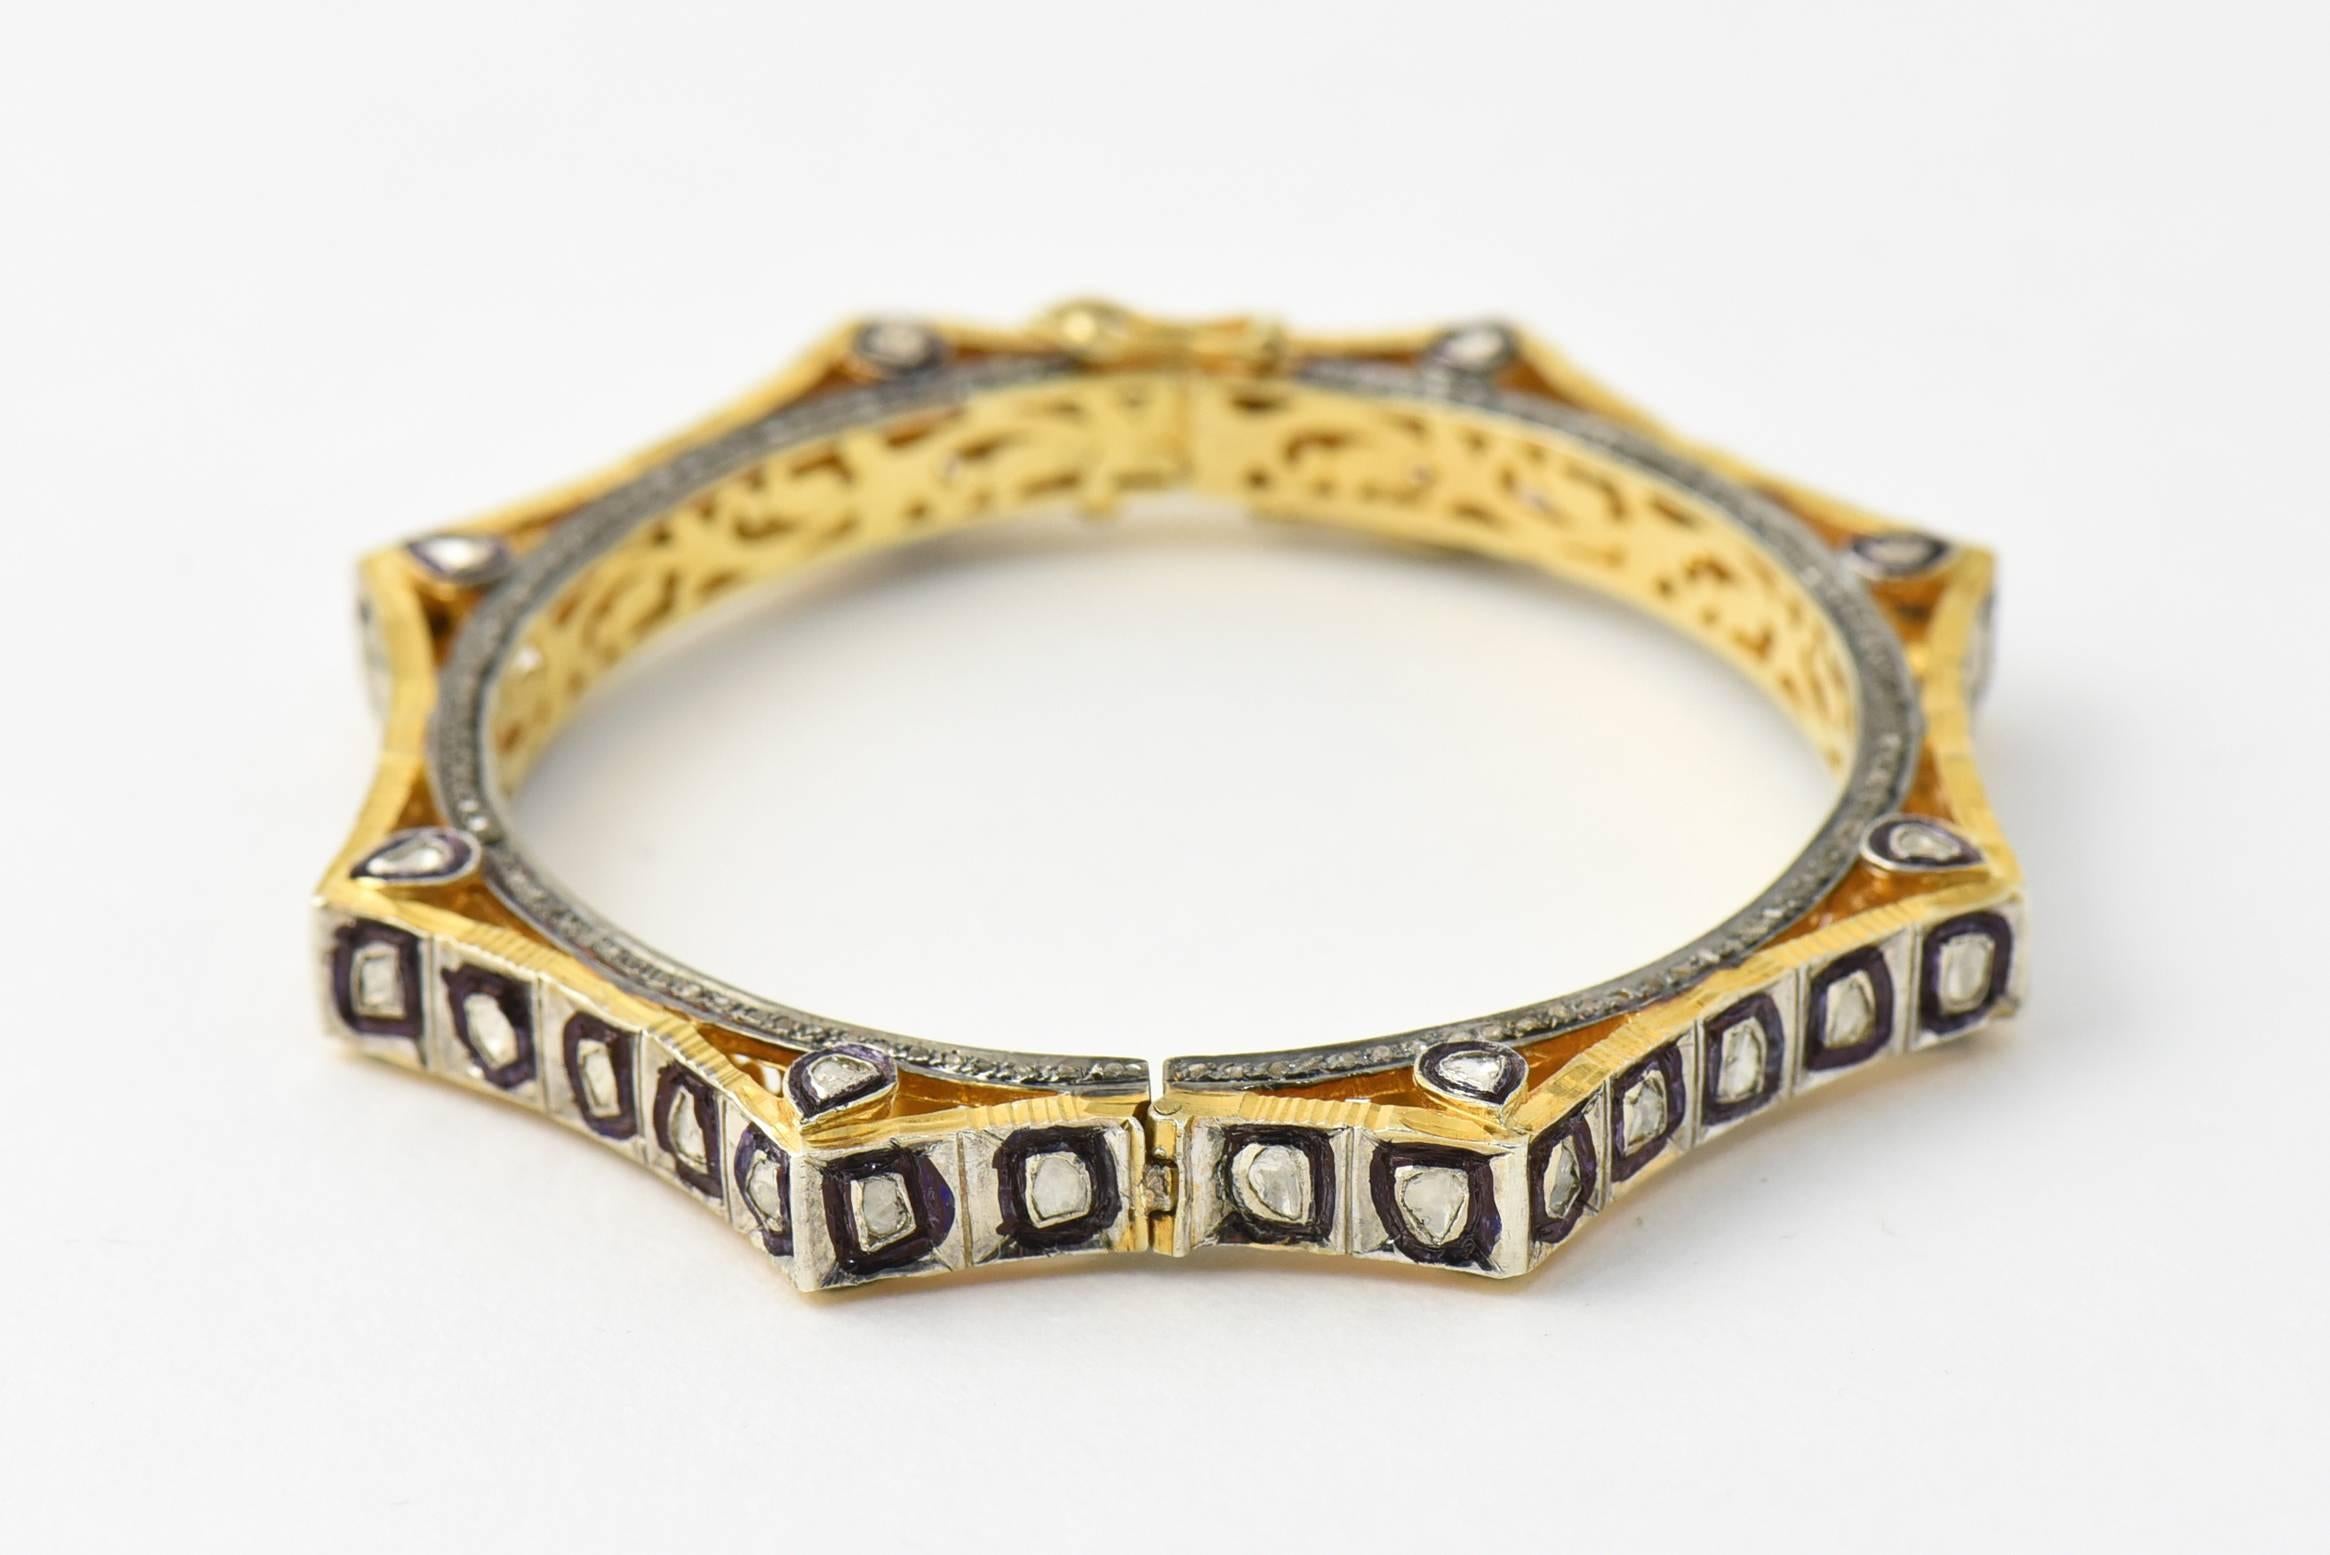 Beautifully made Vermeil and Diamond Indian Bangles with diamonds on three surfaces and a pierced intricate design inside.

The inner circumference is 6.5